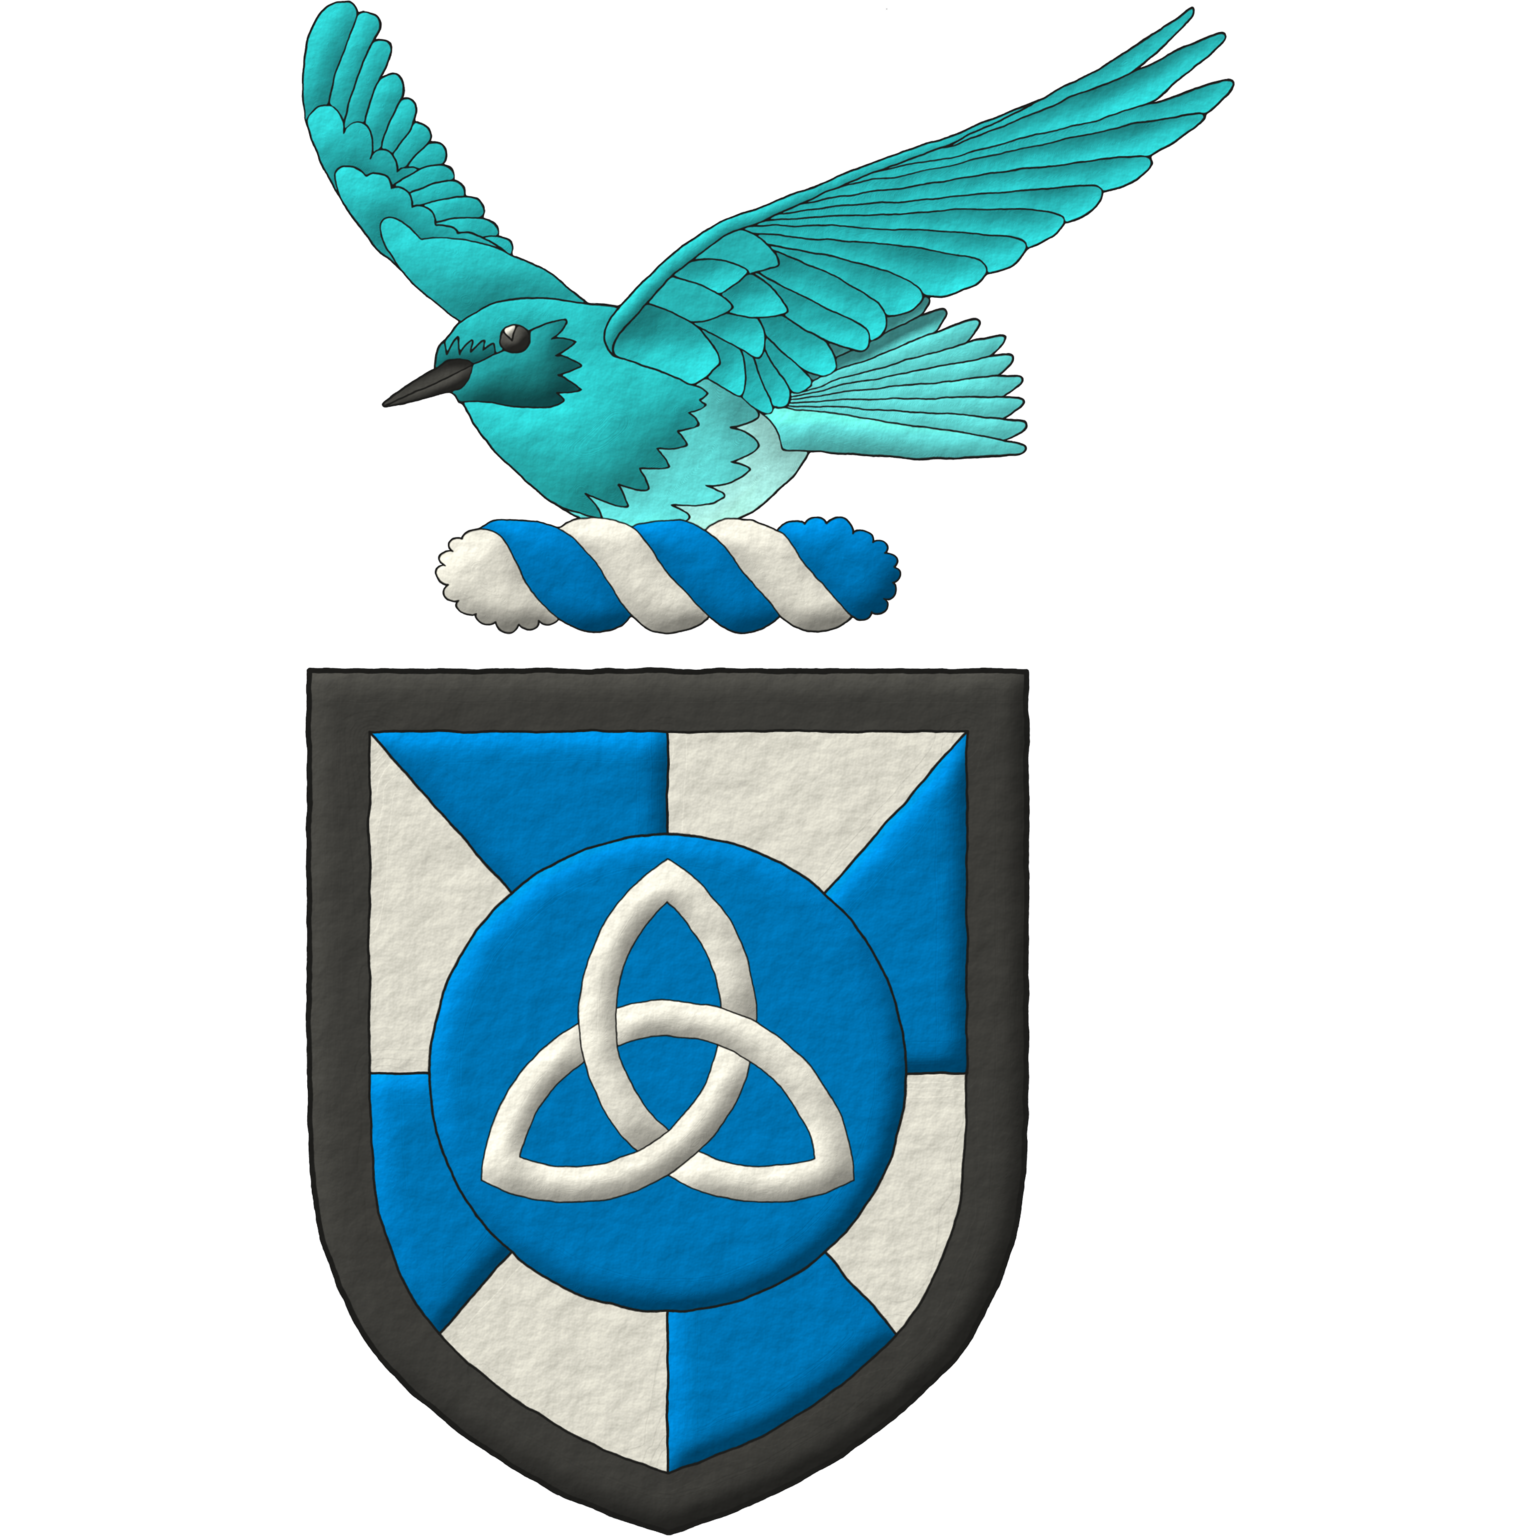 Gyronny Azure and Argent, on a hurt, a triquetra Argent; a bordure Sable. Crest: Upon a wreath Argent and Azure, a mountain bluebird (Sialia currucoides) volant proper.